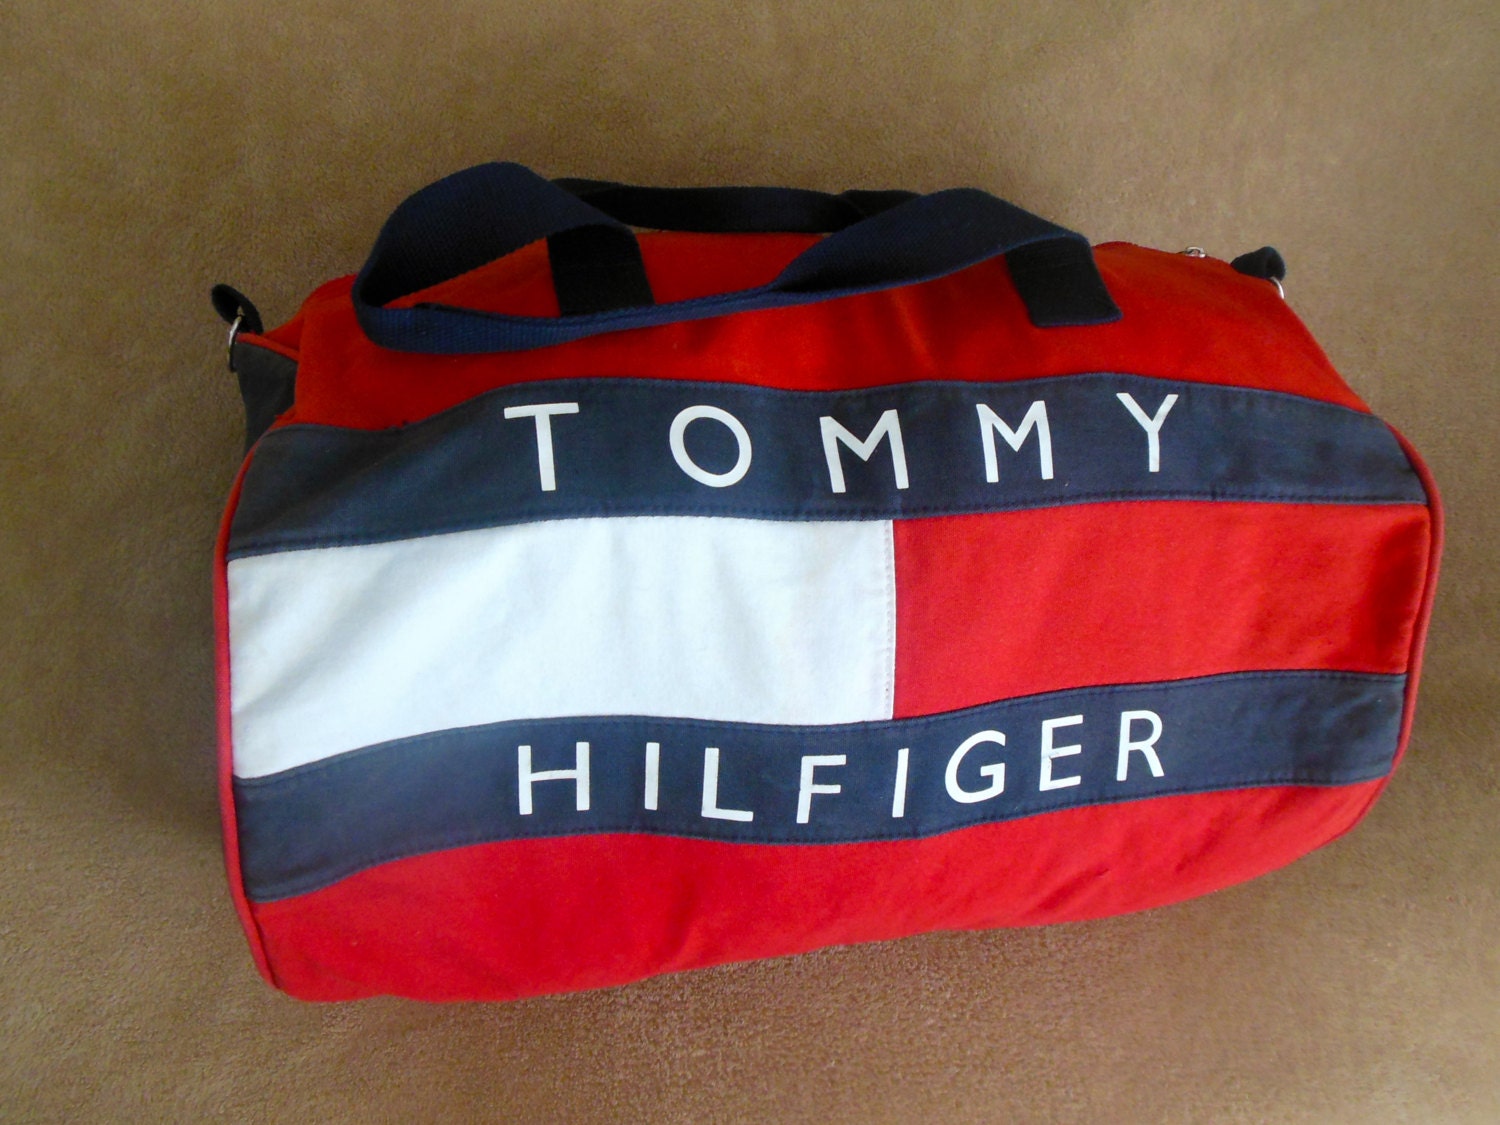 TOMMY HILFIGER . Duffle Bag by Tommy by skinsvintagefashion